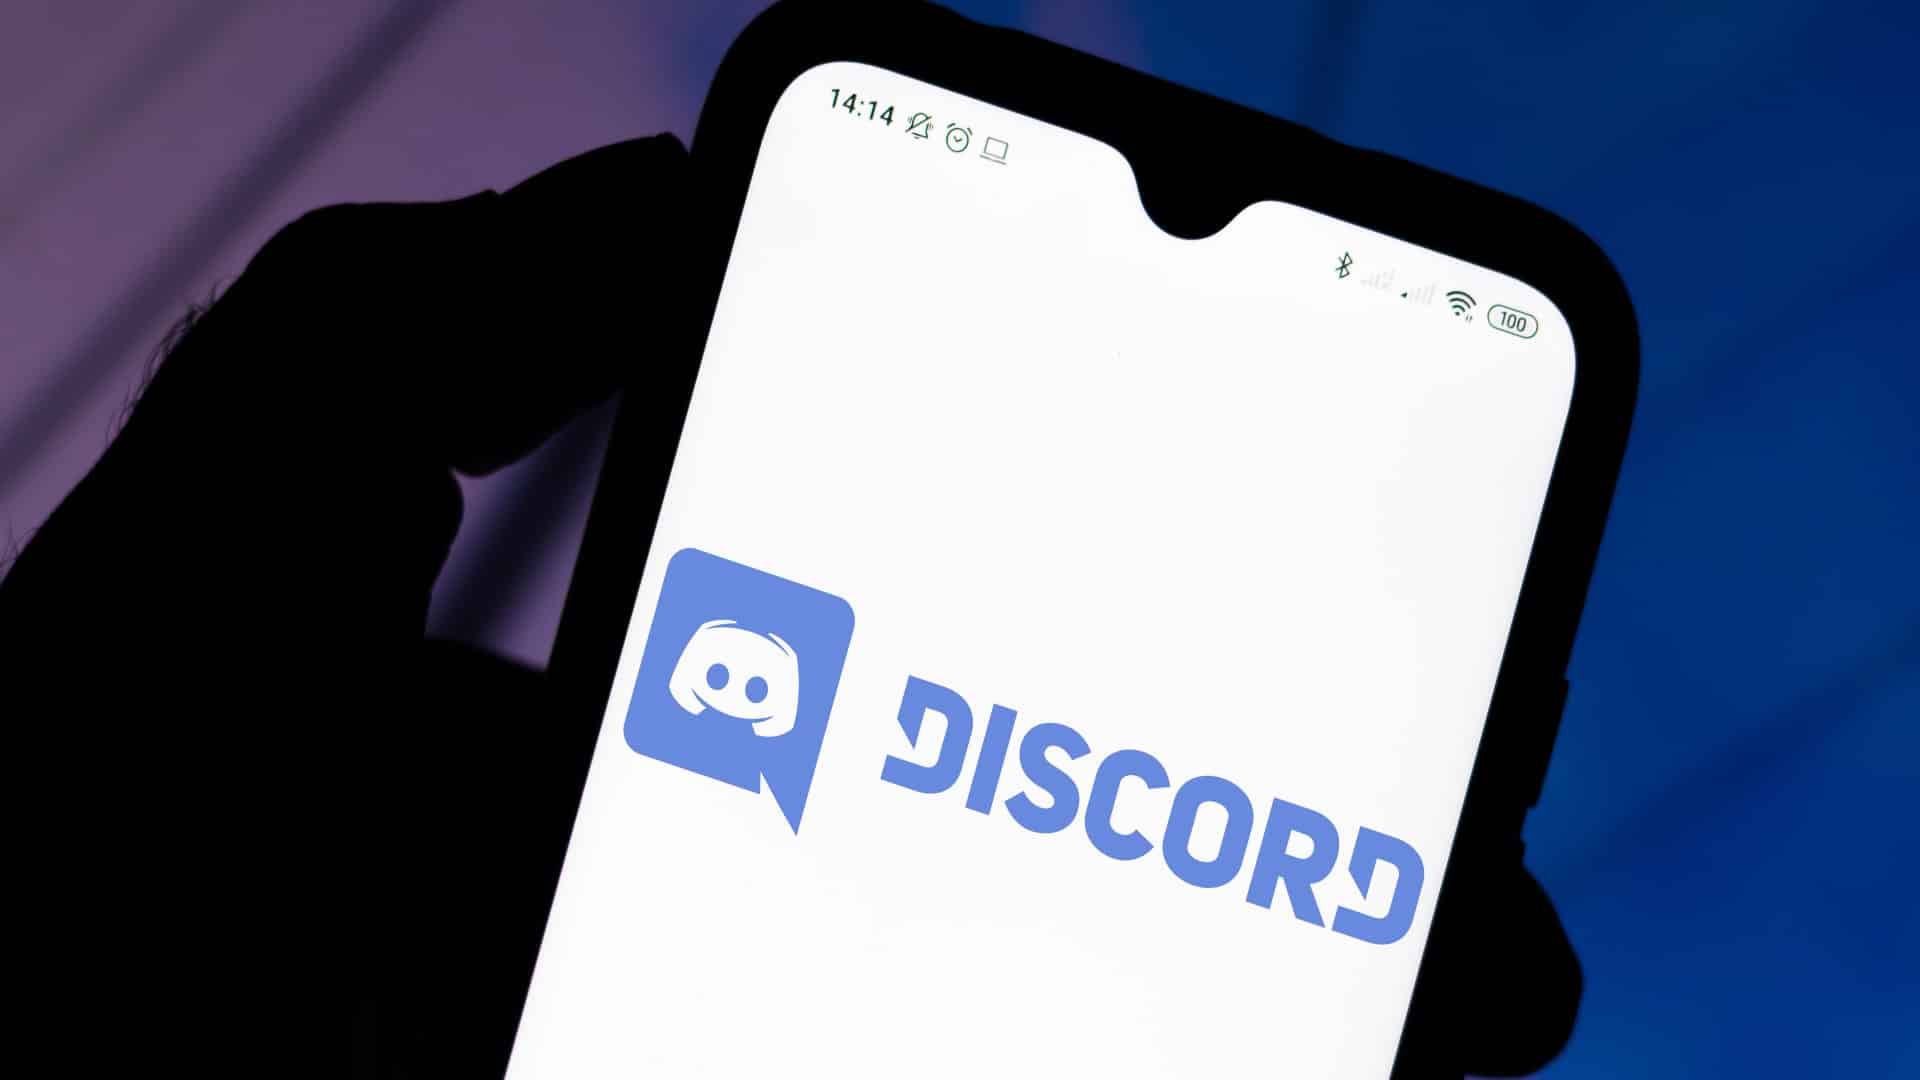 Samsung expands metaverse presence with Discord